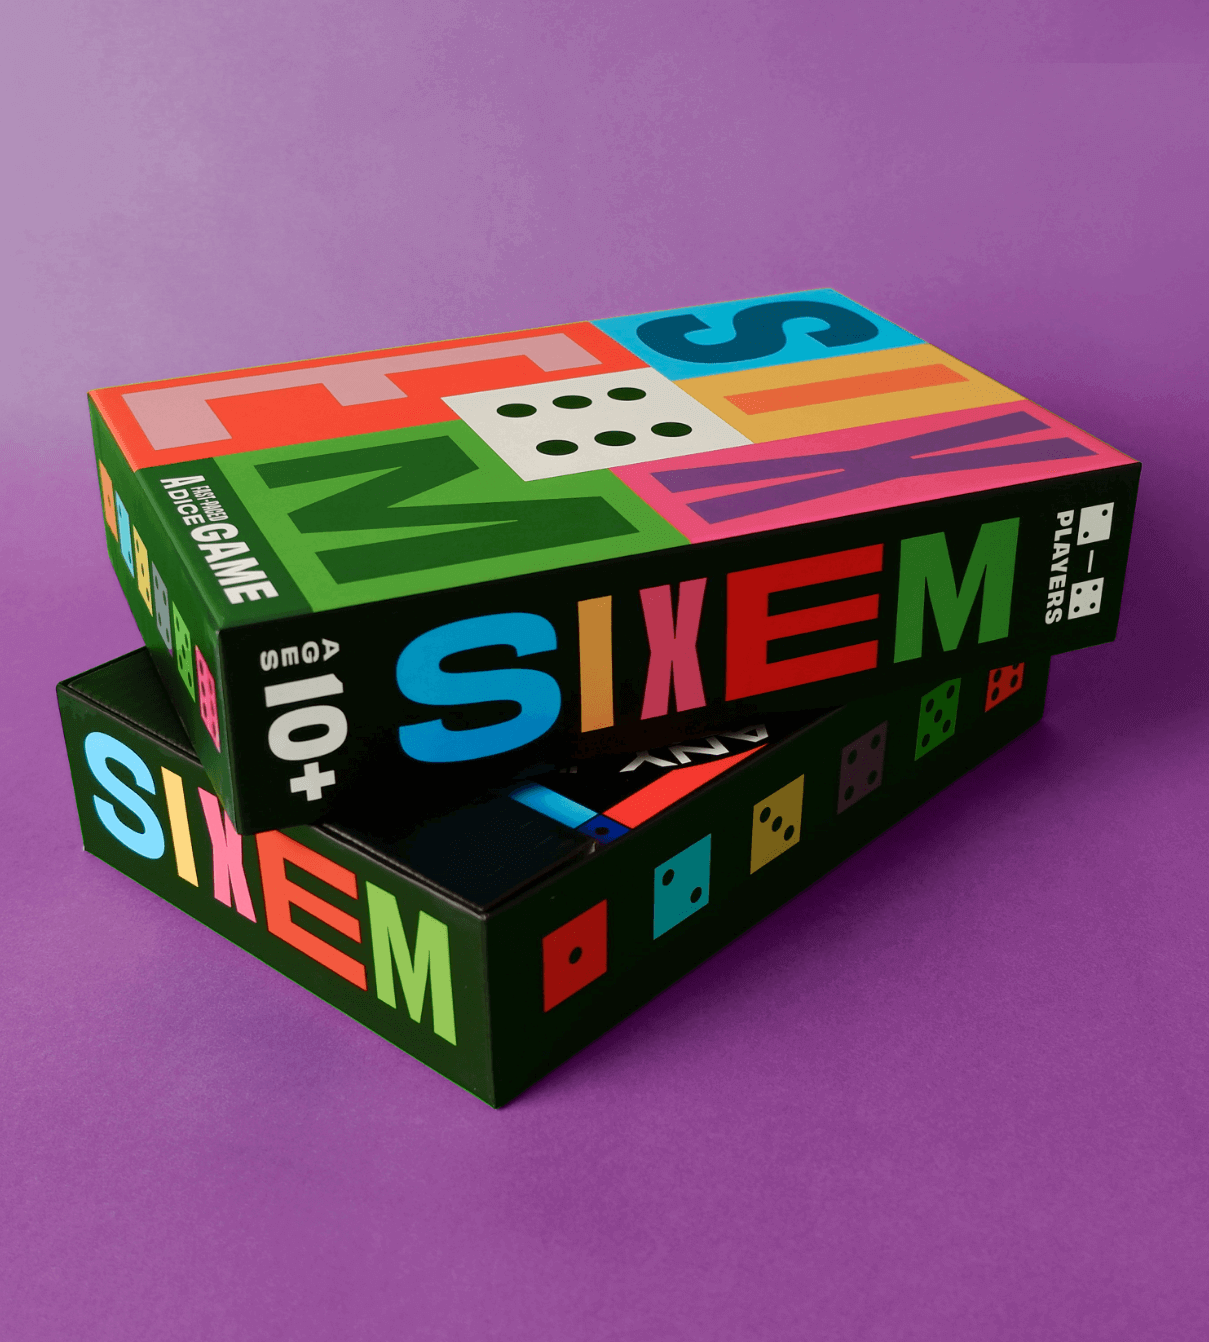 SIXEM box stacked with front cover sitting askew on top, showing off the designs of the box sides with colorful dice, SIXEM, ages 10+, and 2-4 players information